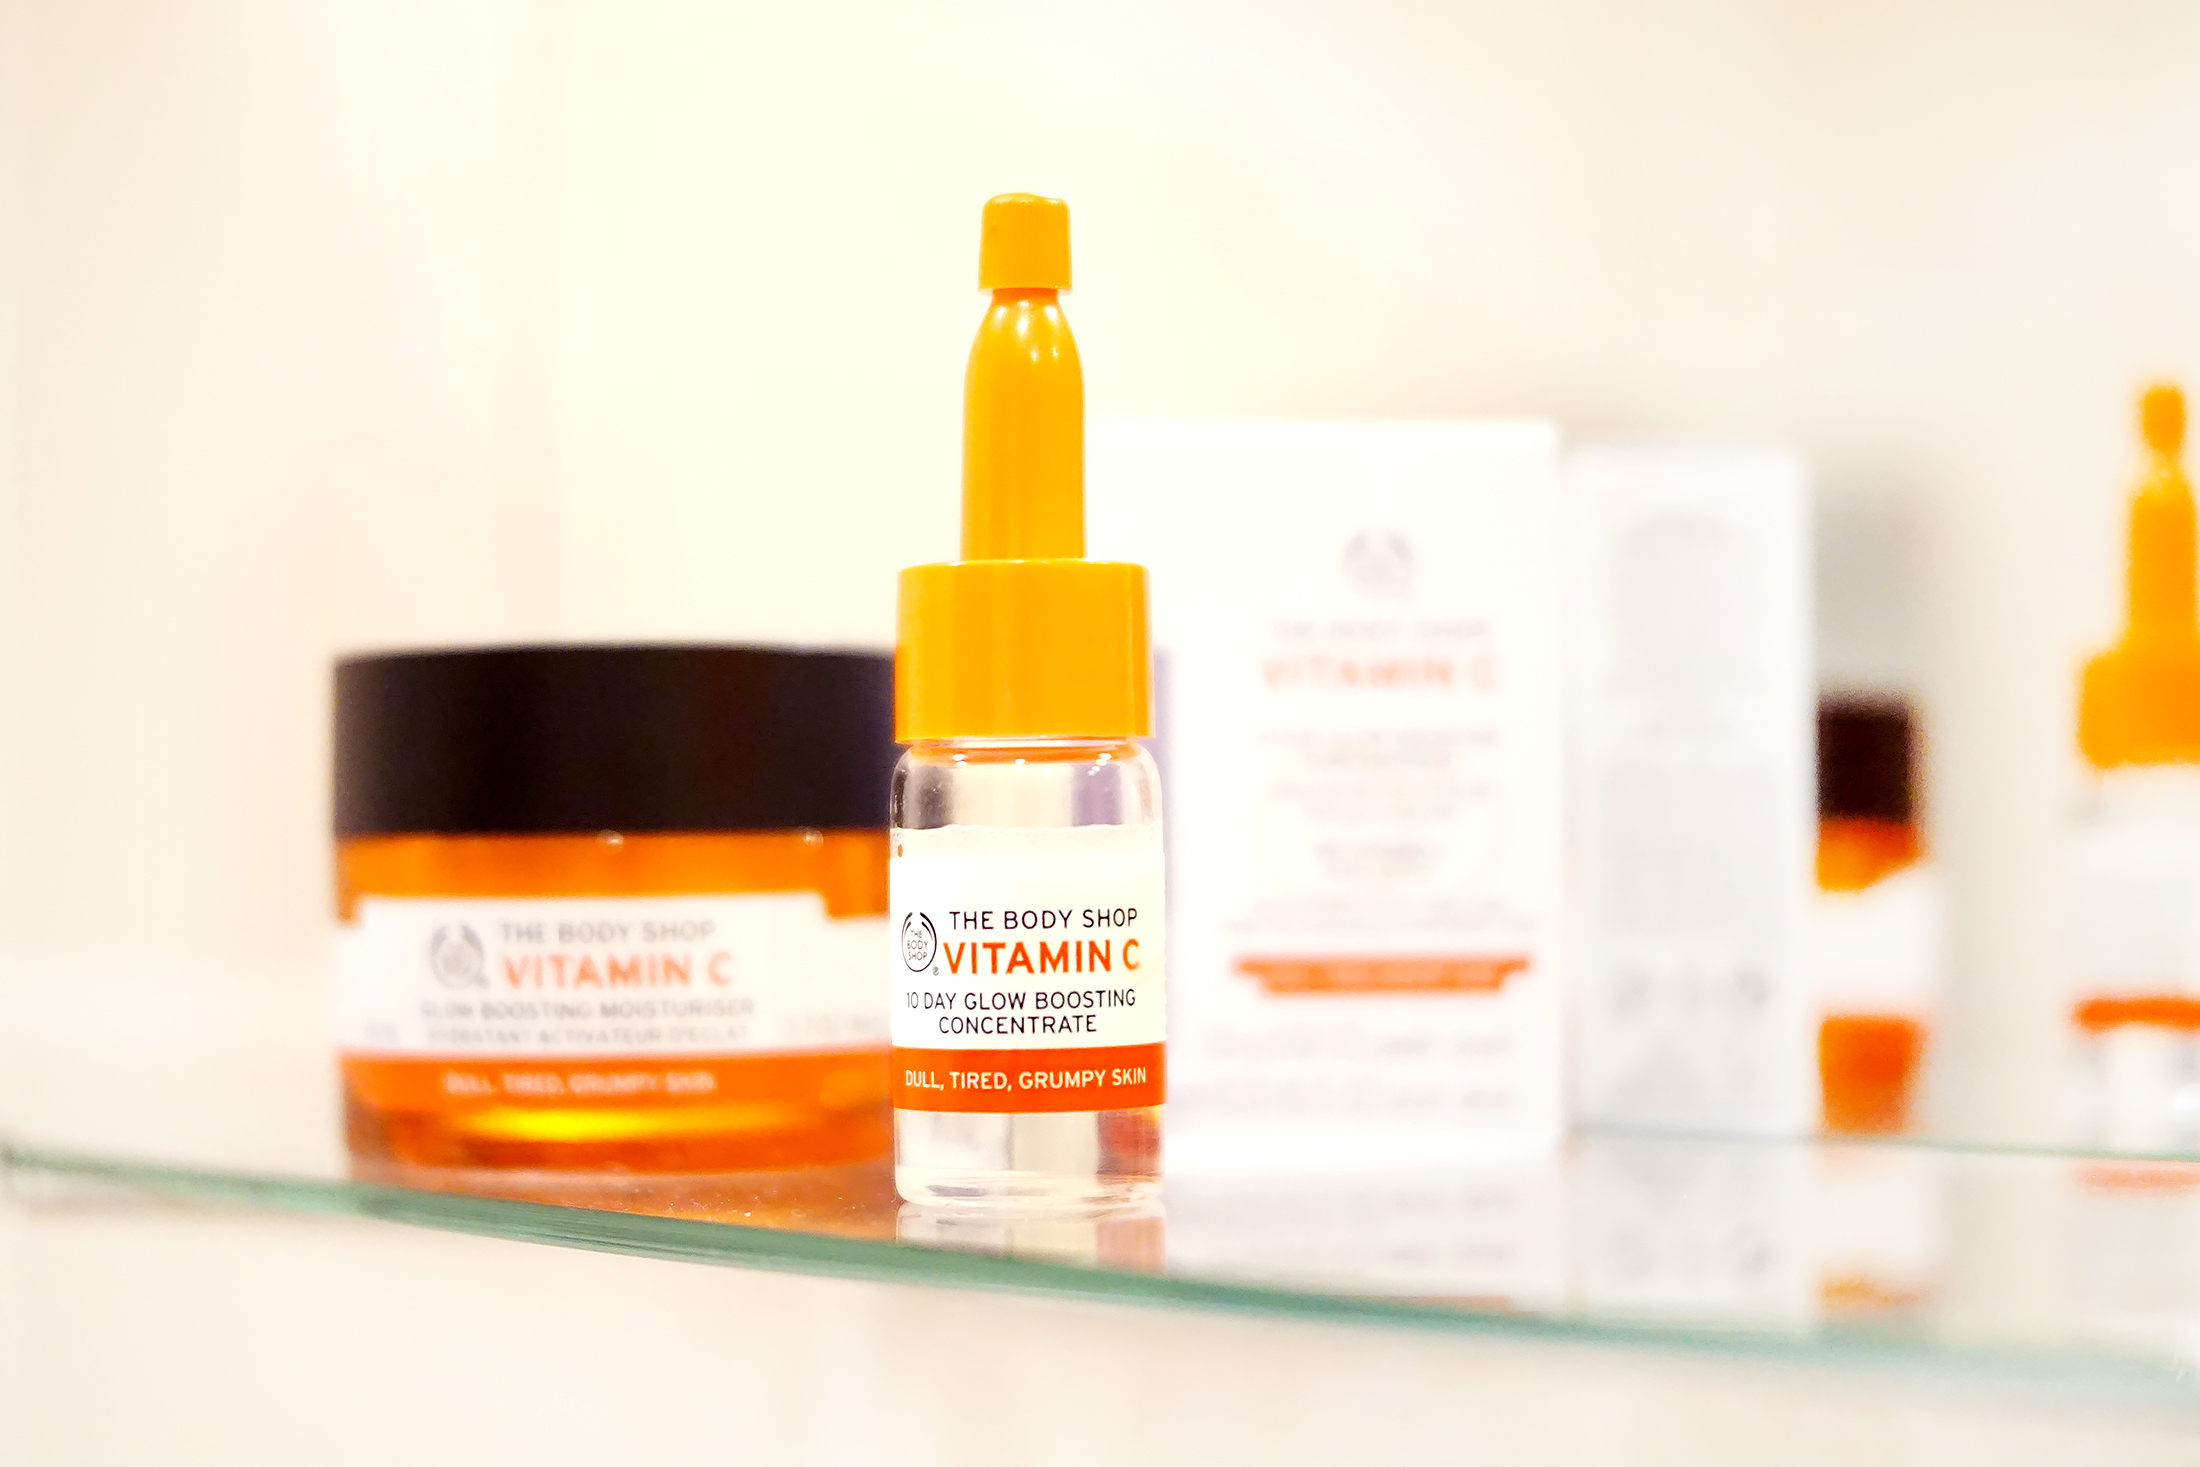 Seeing Double: Clinique Fresh Pressed Daily Booster vs. The Body Shop Vitamin C 10 Day Glow Boosting Concentrate